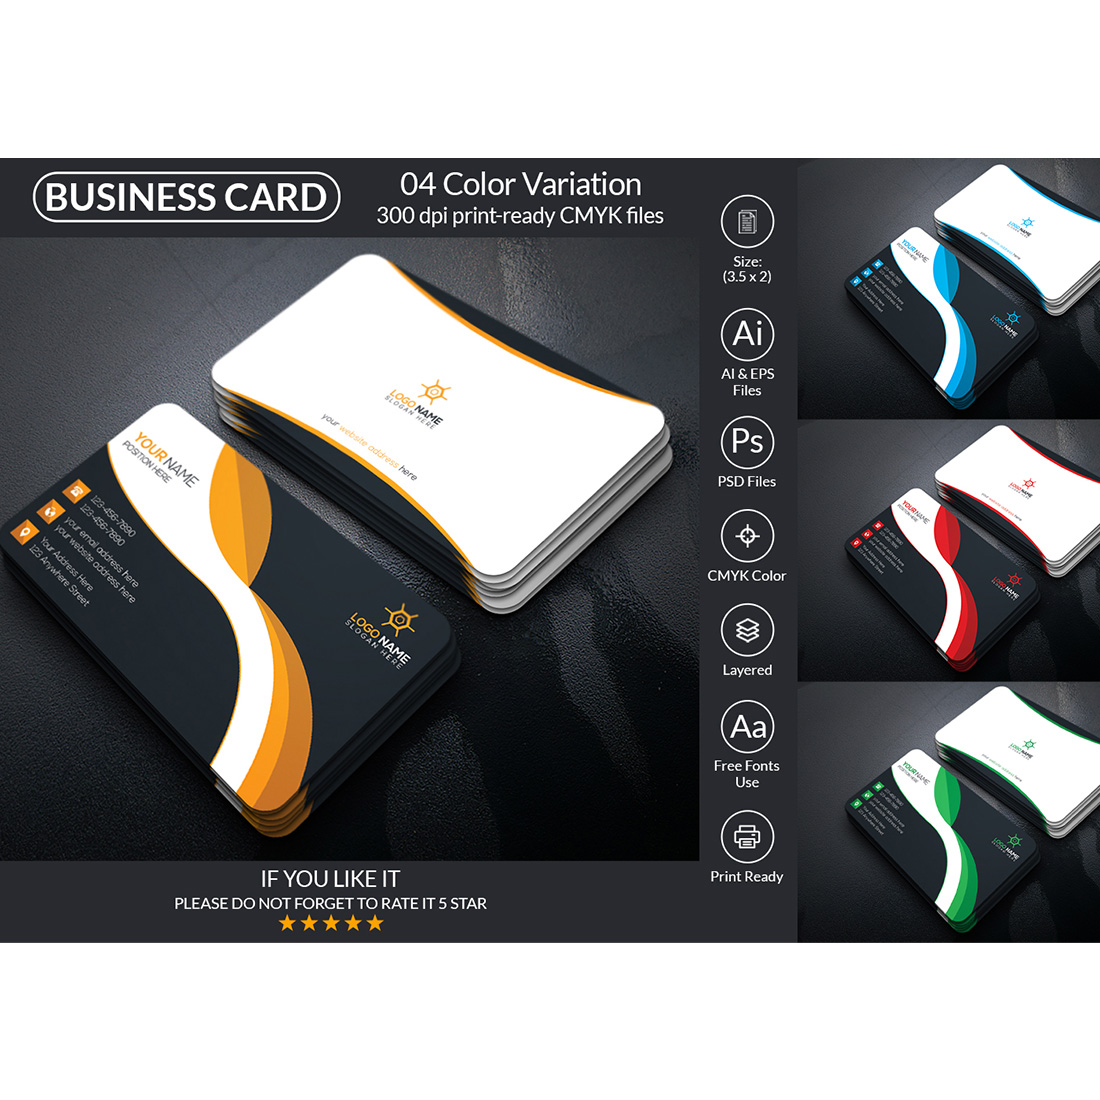 design professional print ready business card in 12 hours